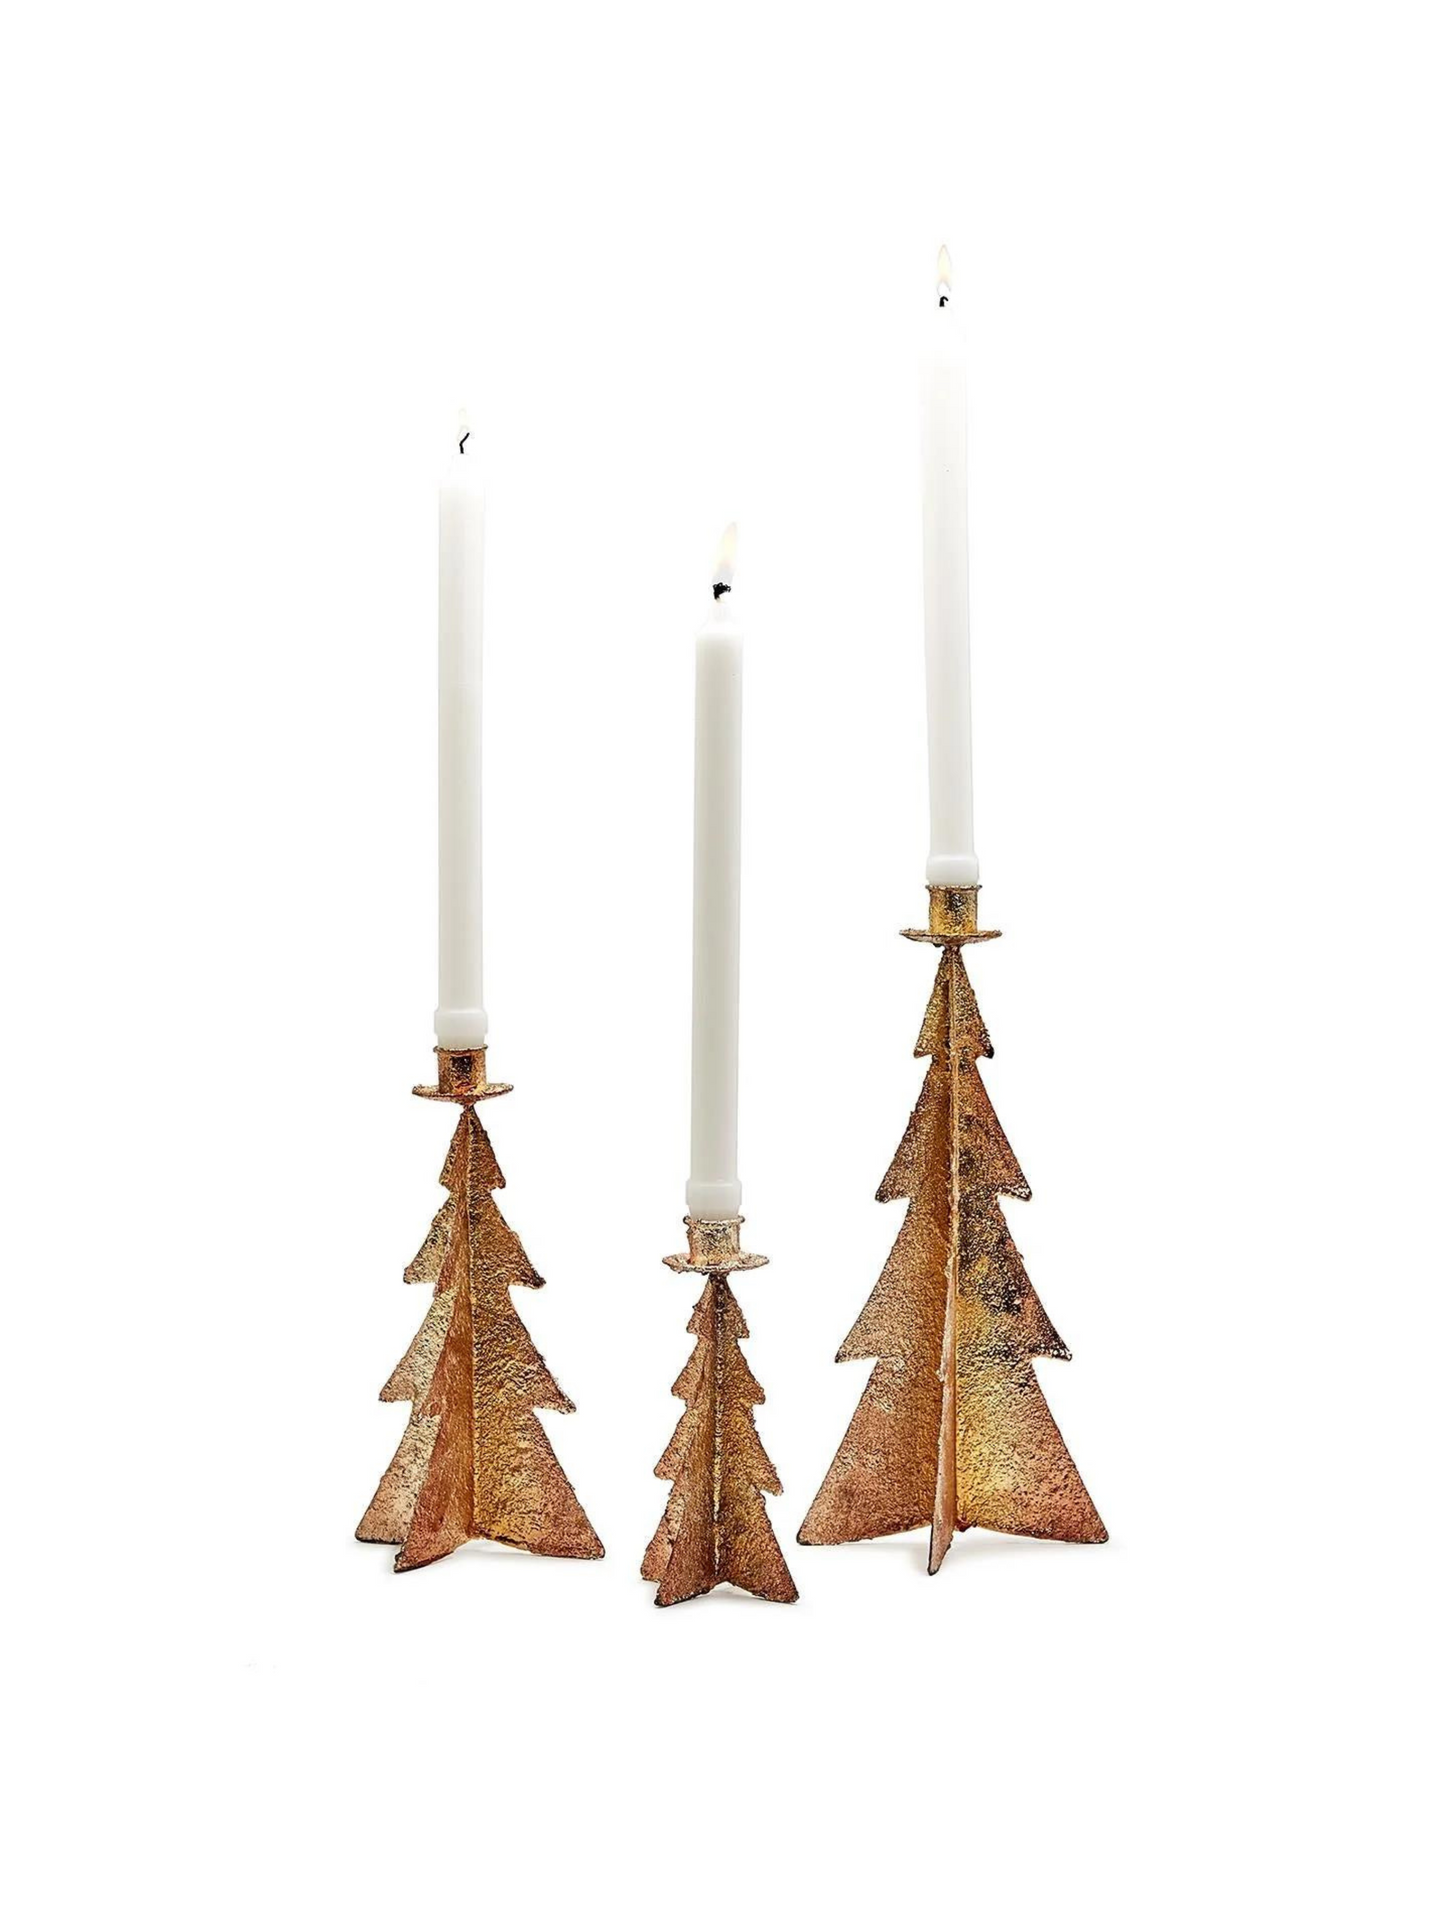 SET OF 3 HAND-CRAFTED GOLDEN CHRISTMAS TREE CANDLEHOLDERS